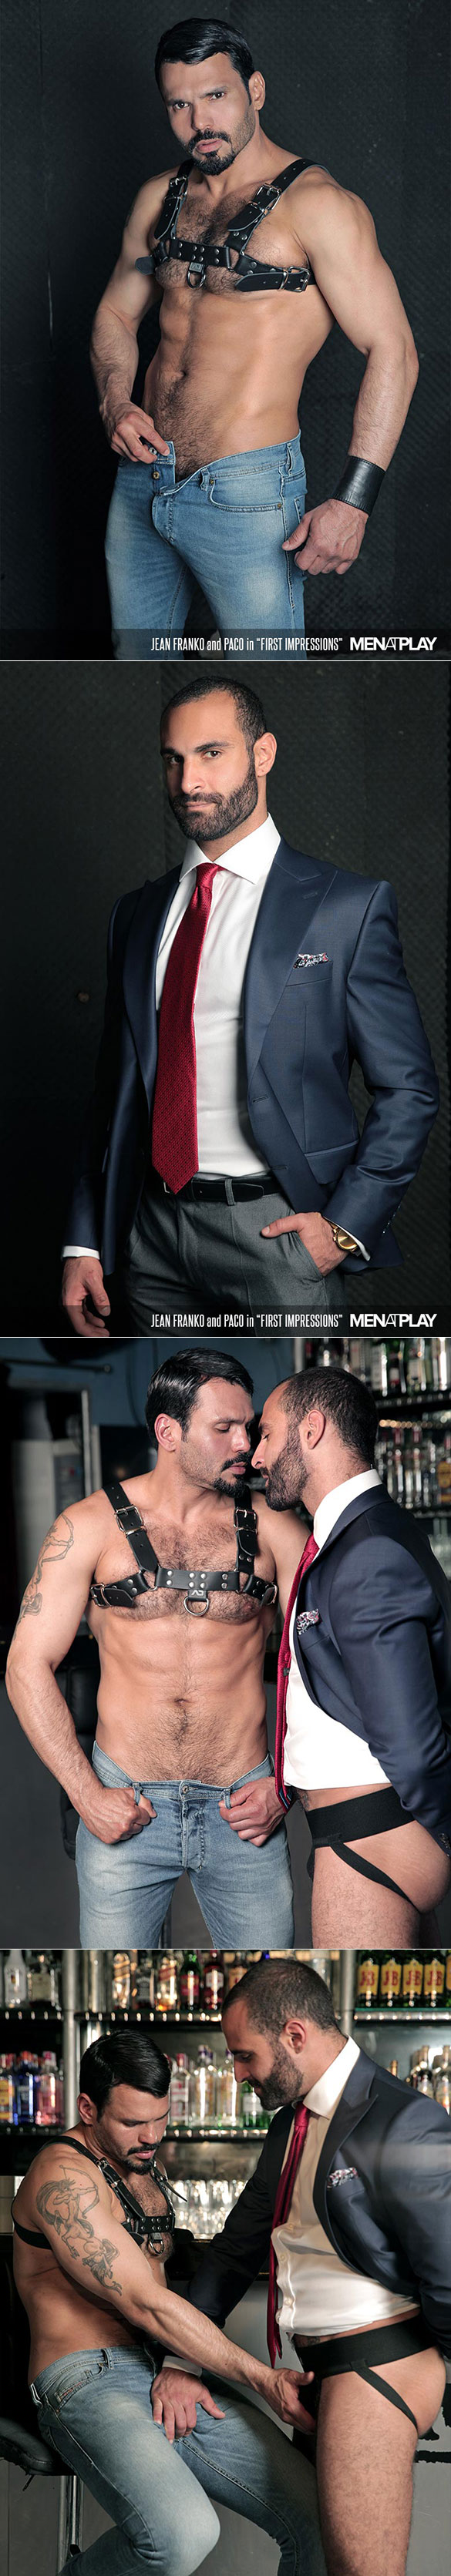 MenAtPlay: Jean Franko pounds Paco in "First Impressions"